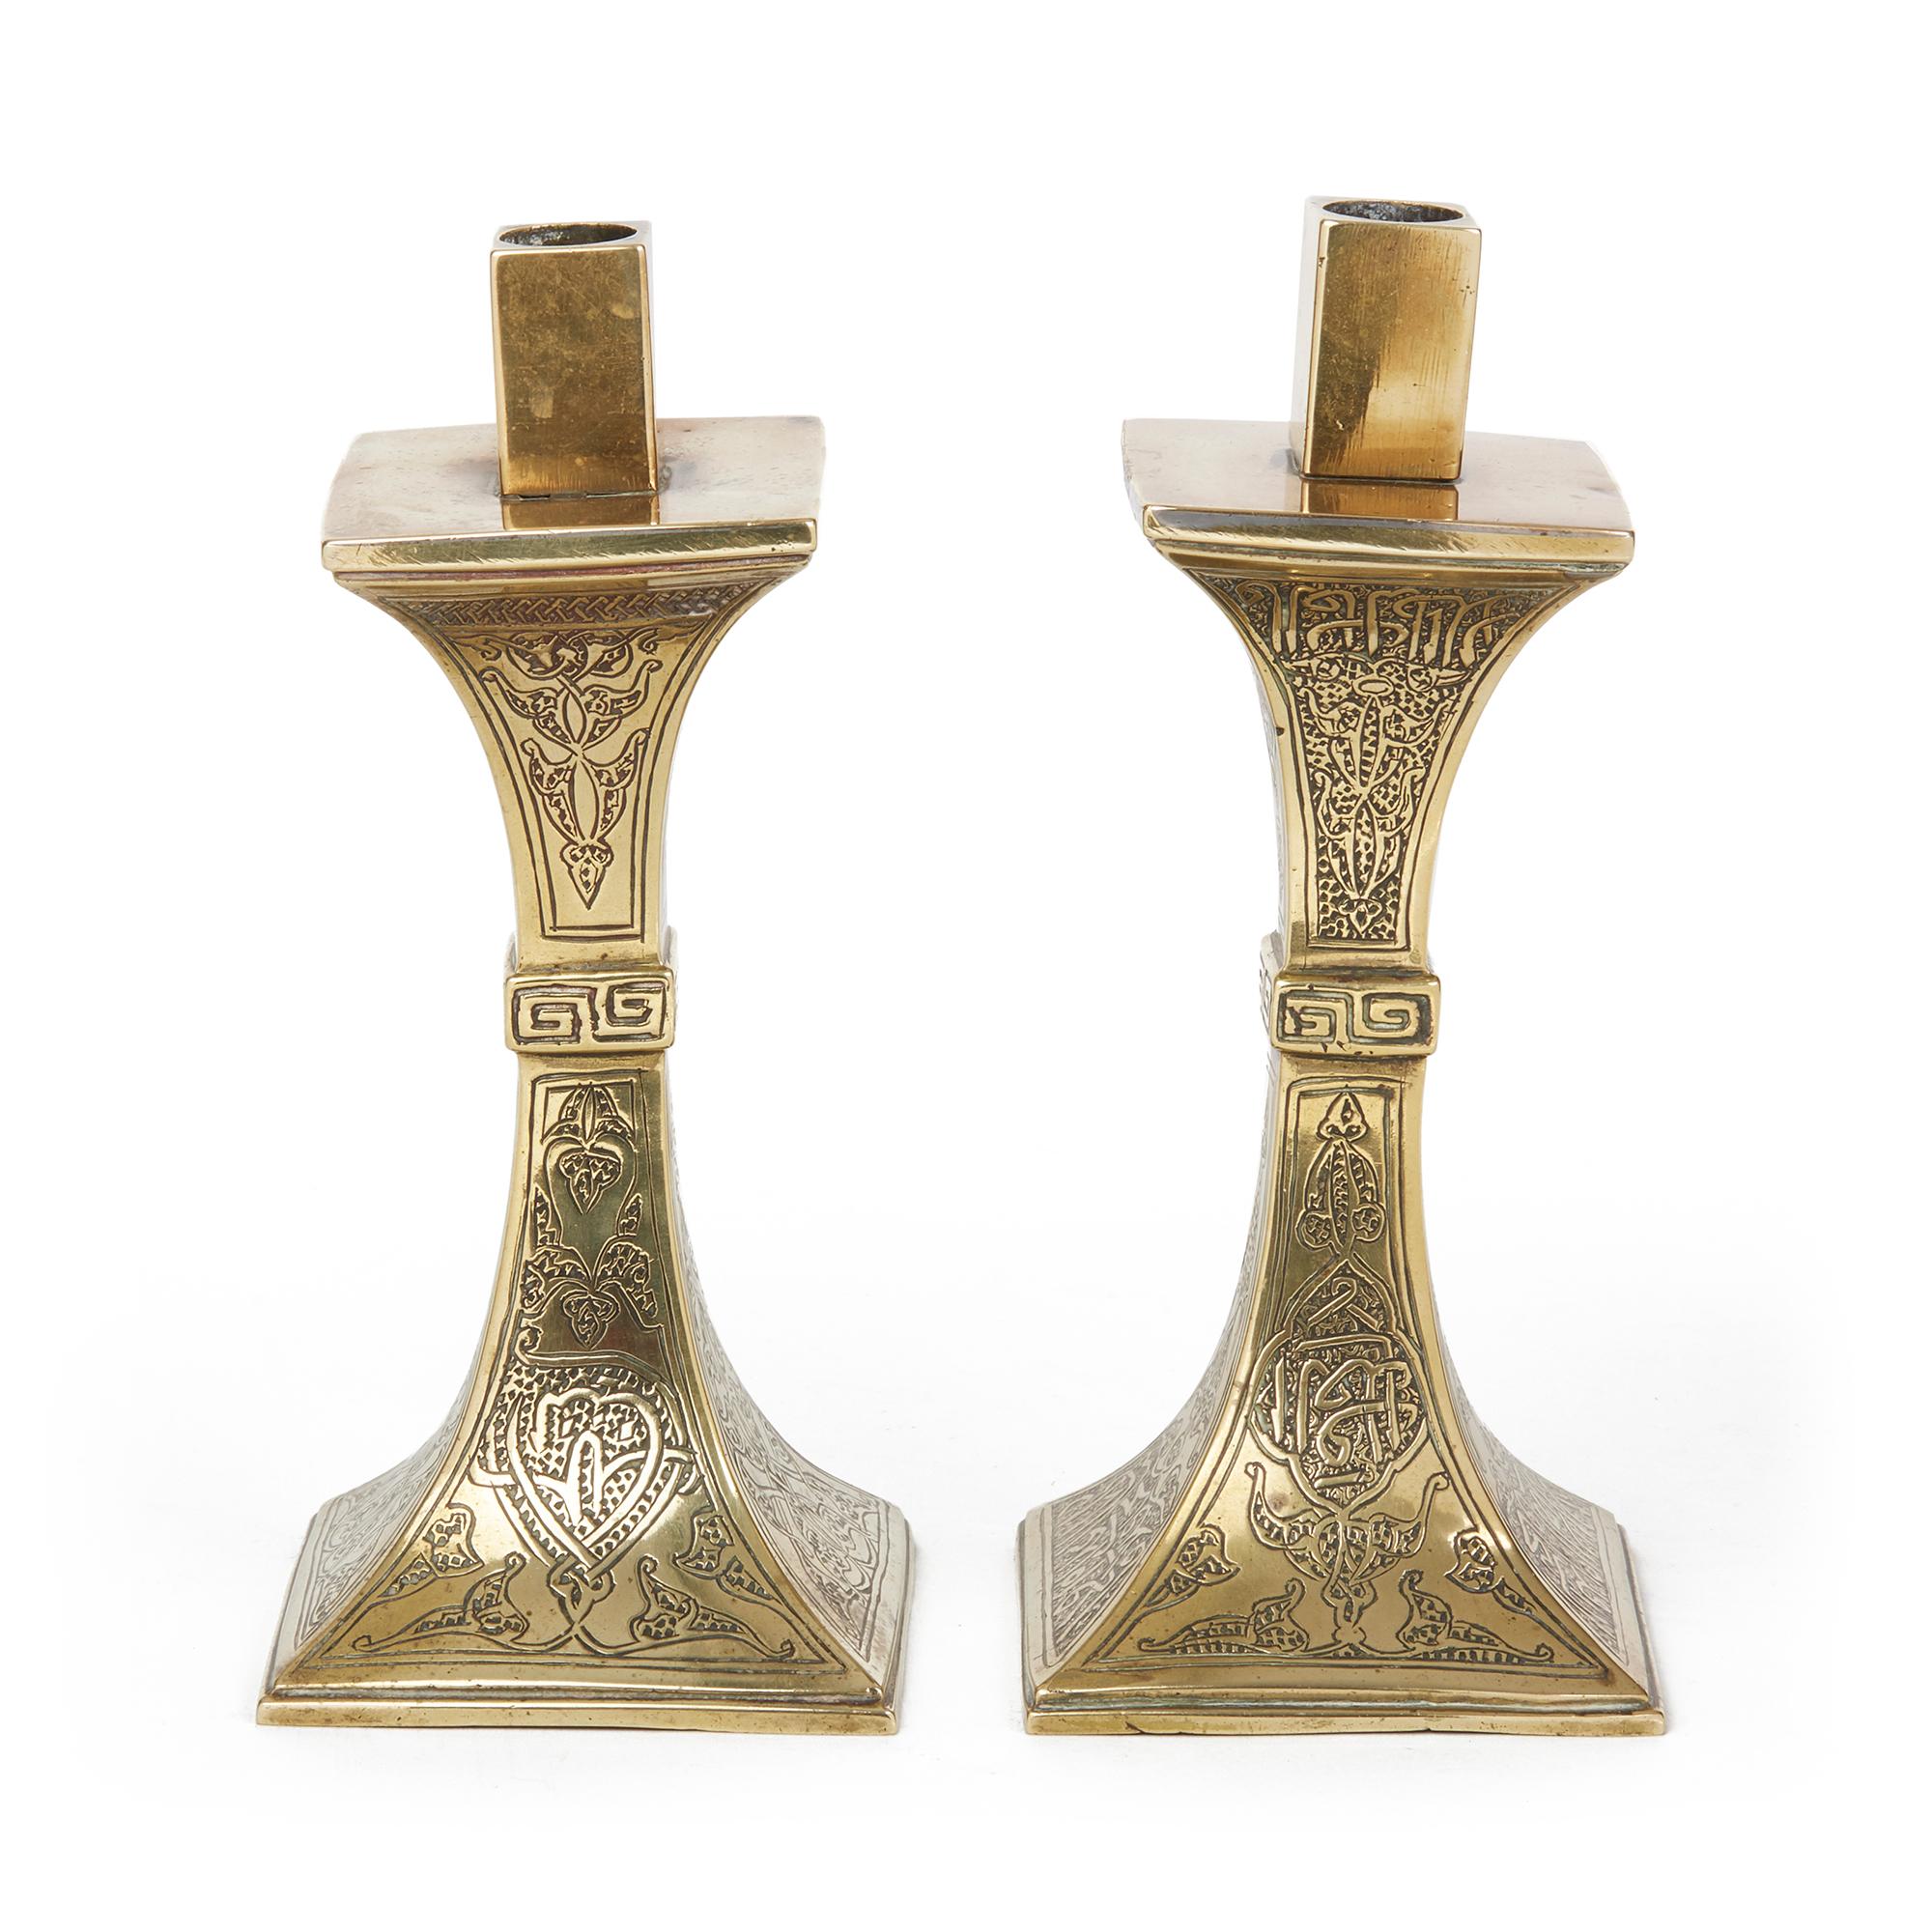 A very fine pair antique Islamic, Middle Eastern, brass pedestal candlesticks of square form the body hand engraved with stylised floral and scroll designs decorated with Arabic inscriptions. Neither is marked. Believed 19th or very early 20th